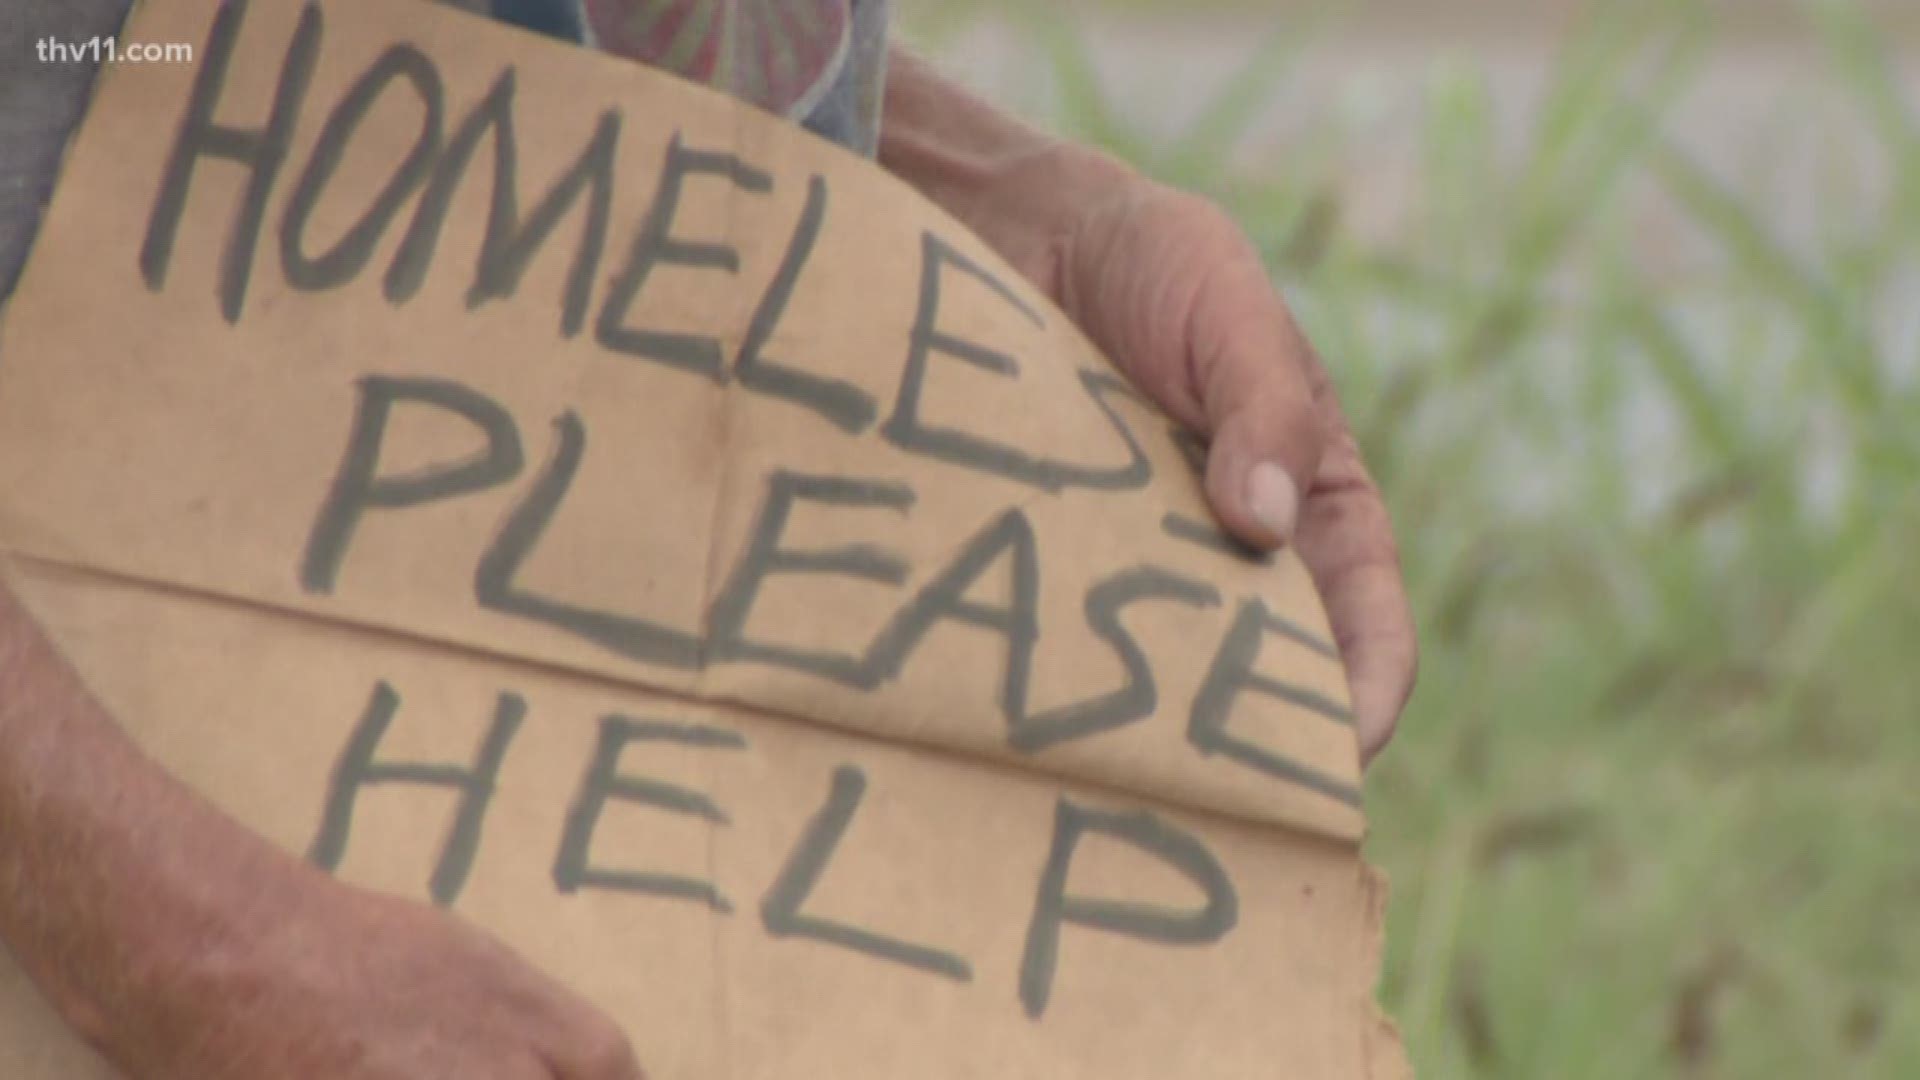 Fayetteville approves homeless camp